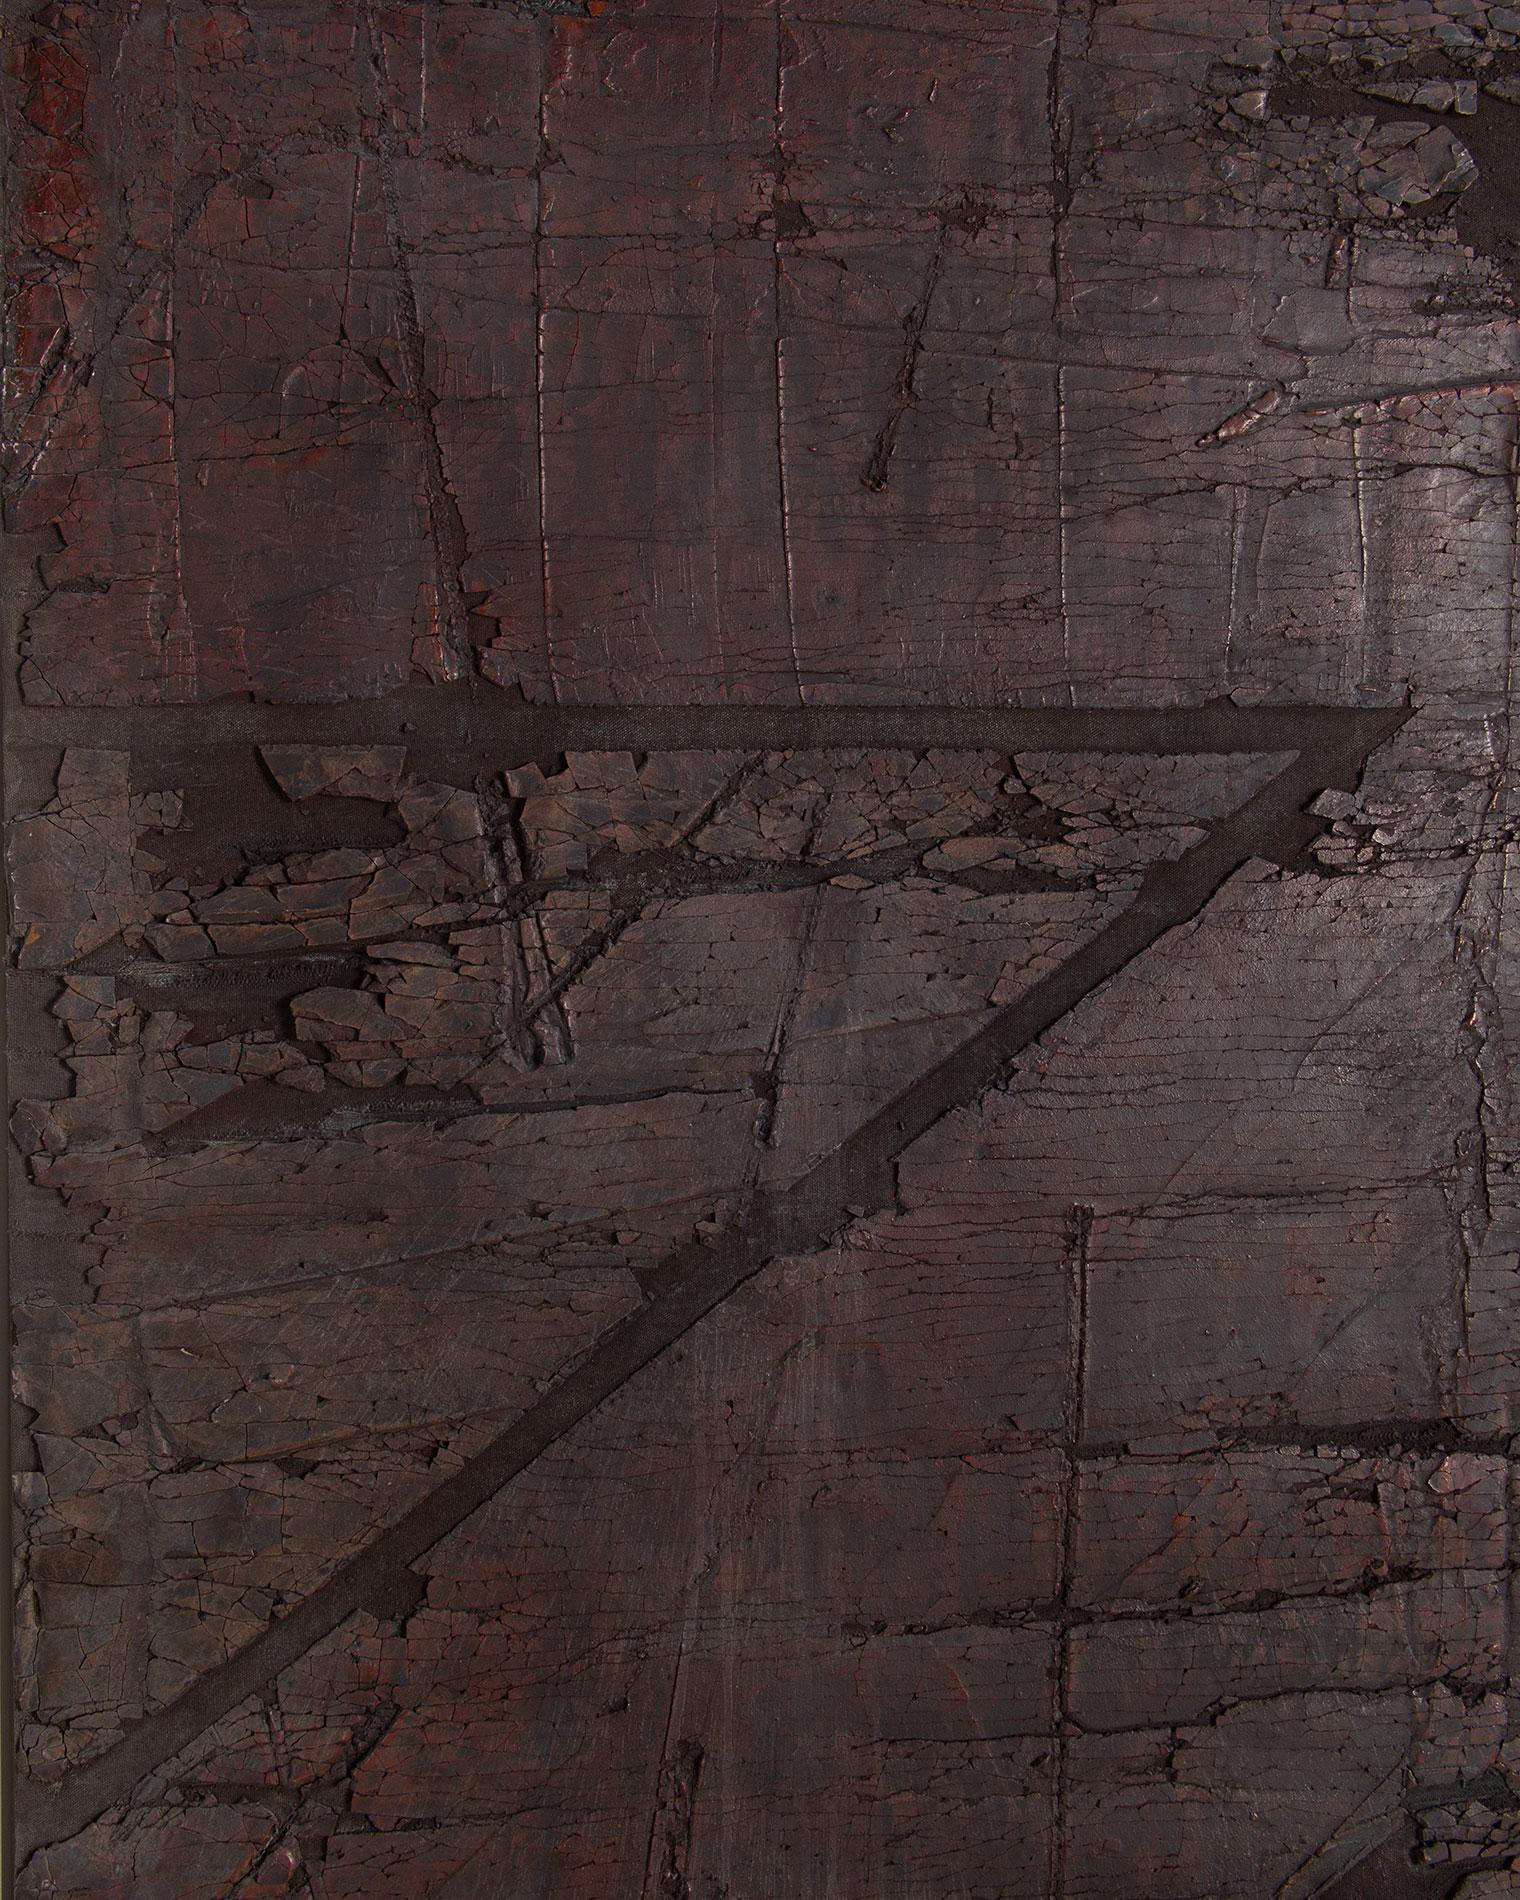 A textural mixed-media painting by American Contemporary artist, Harry Bouras. Oil and plaster on canvas, signed en verso, titled, dated 7-77, unframed.

Harry Bouras was an internationally known artist, critic, teacher, and host of a weekly